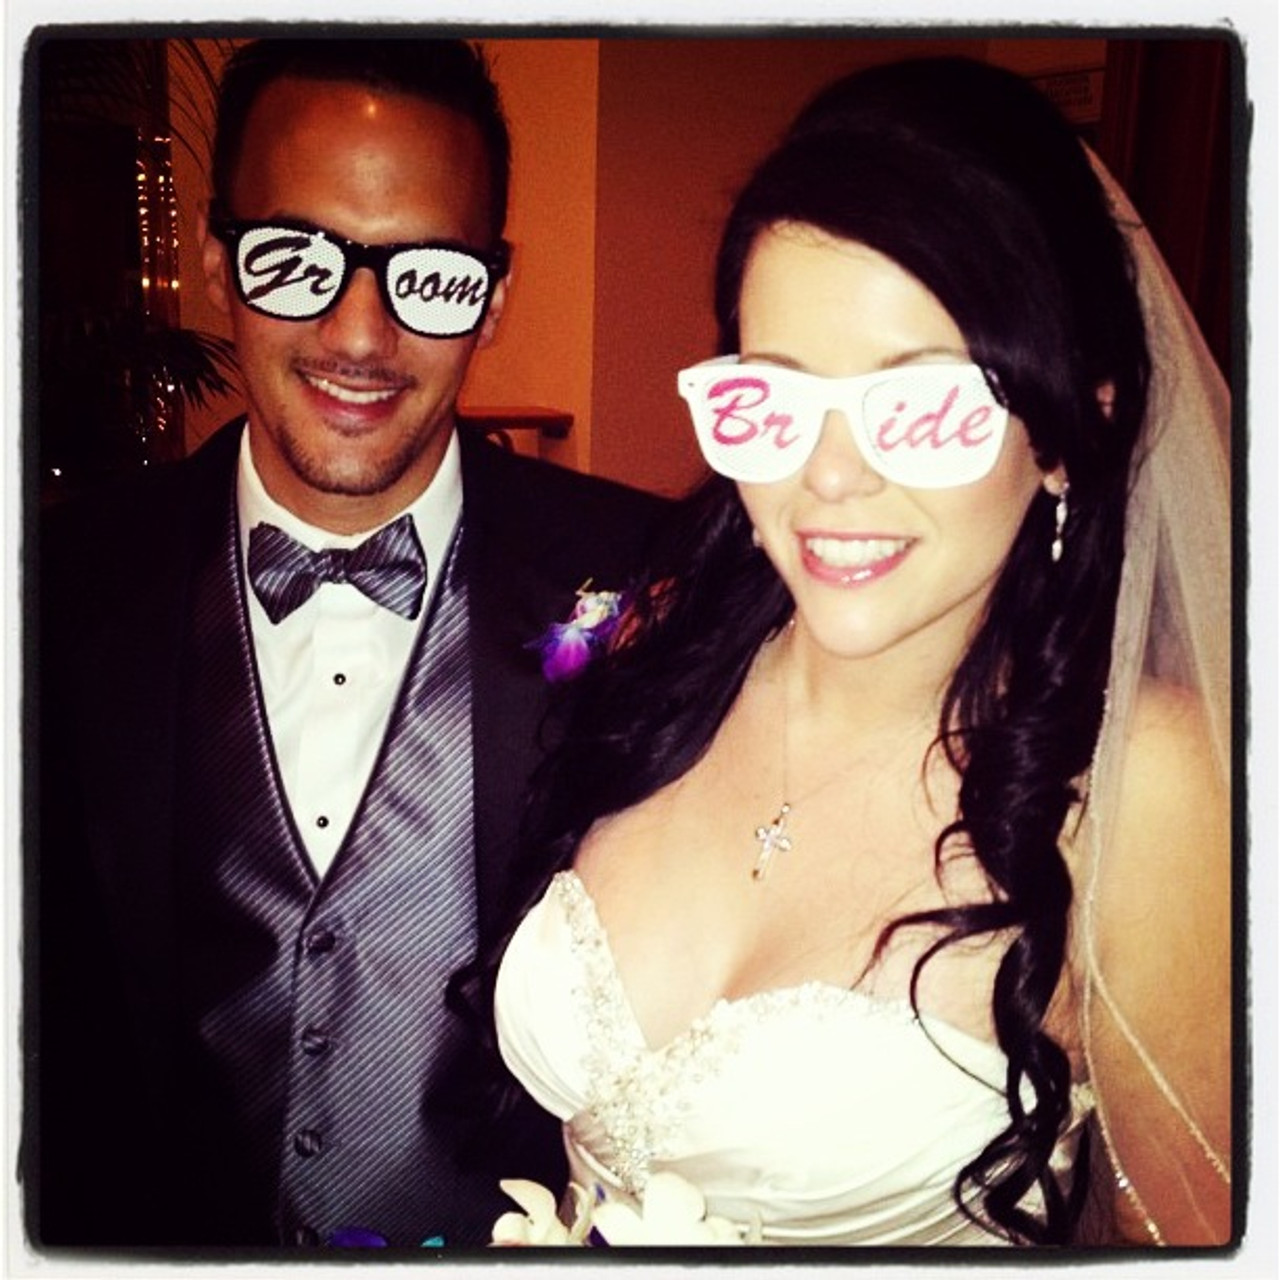 Printed sunglasses for bride and groom